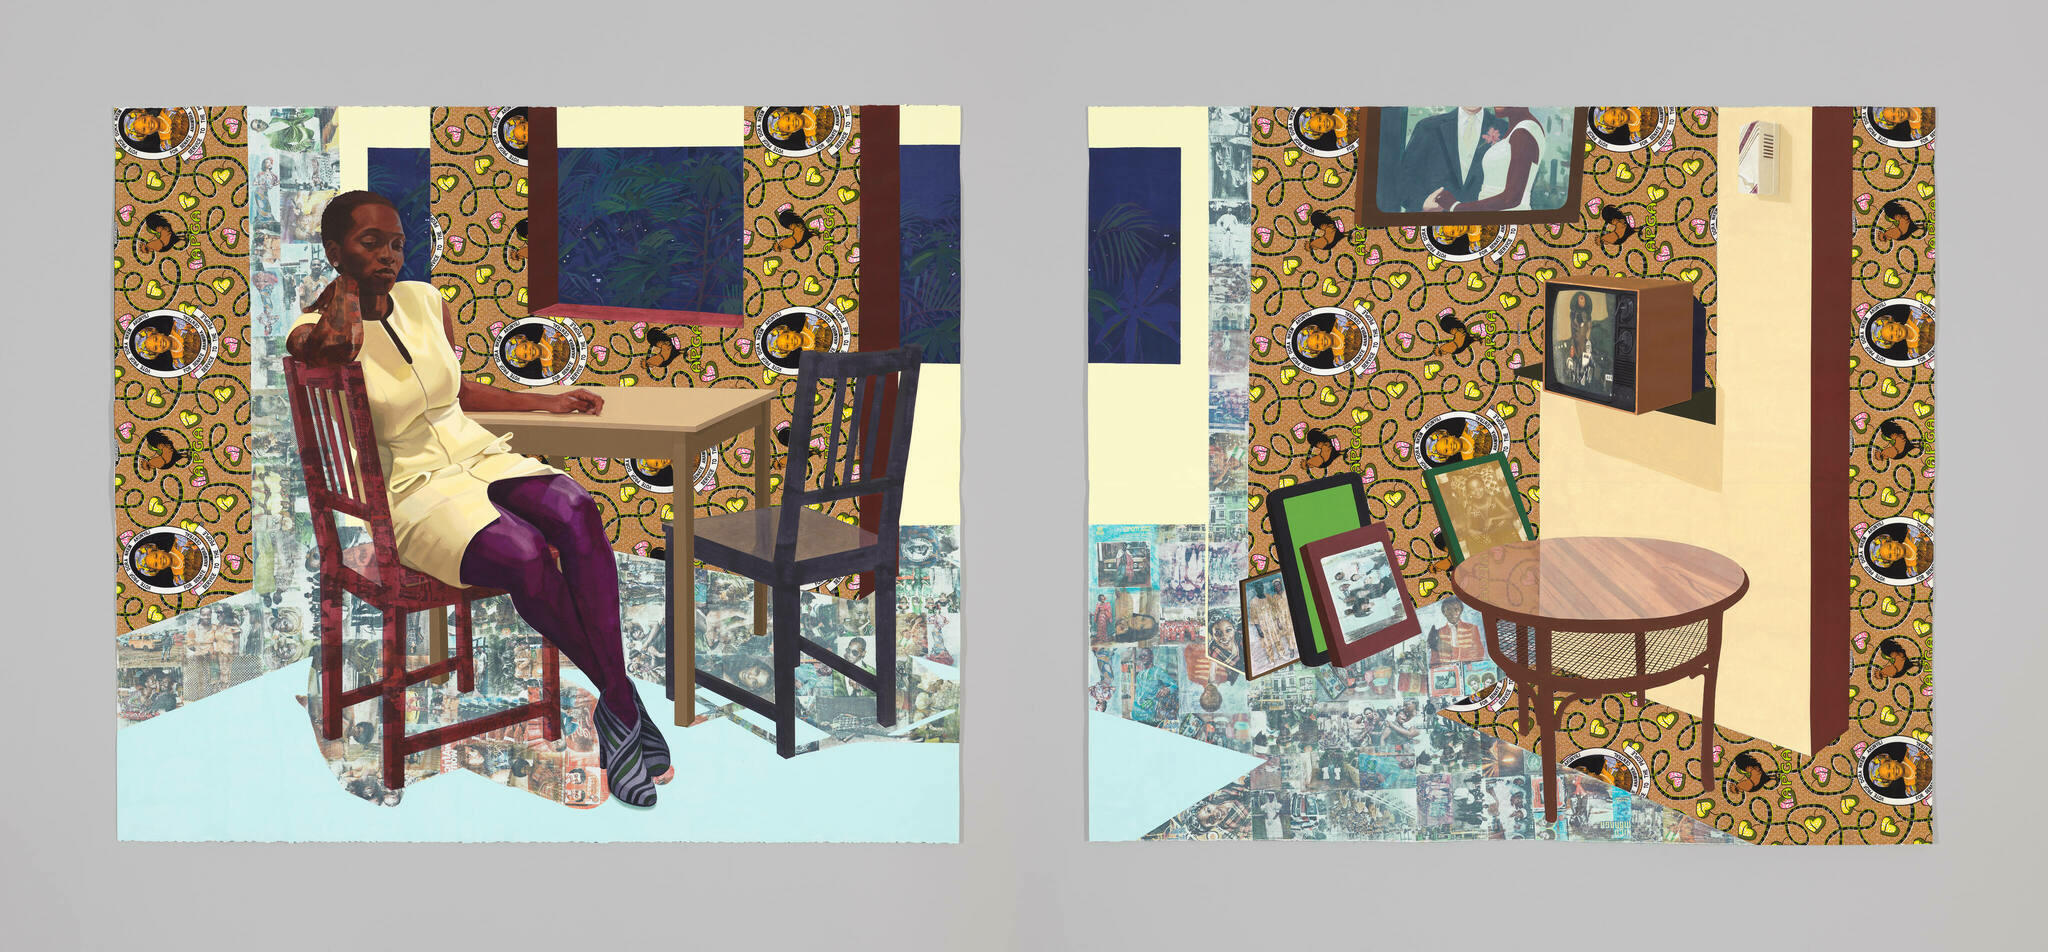 In a room extending across a diptych, a pensive Black woman sits at a table surrounded by pattered surfaces.